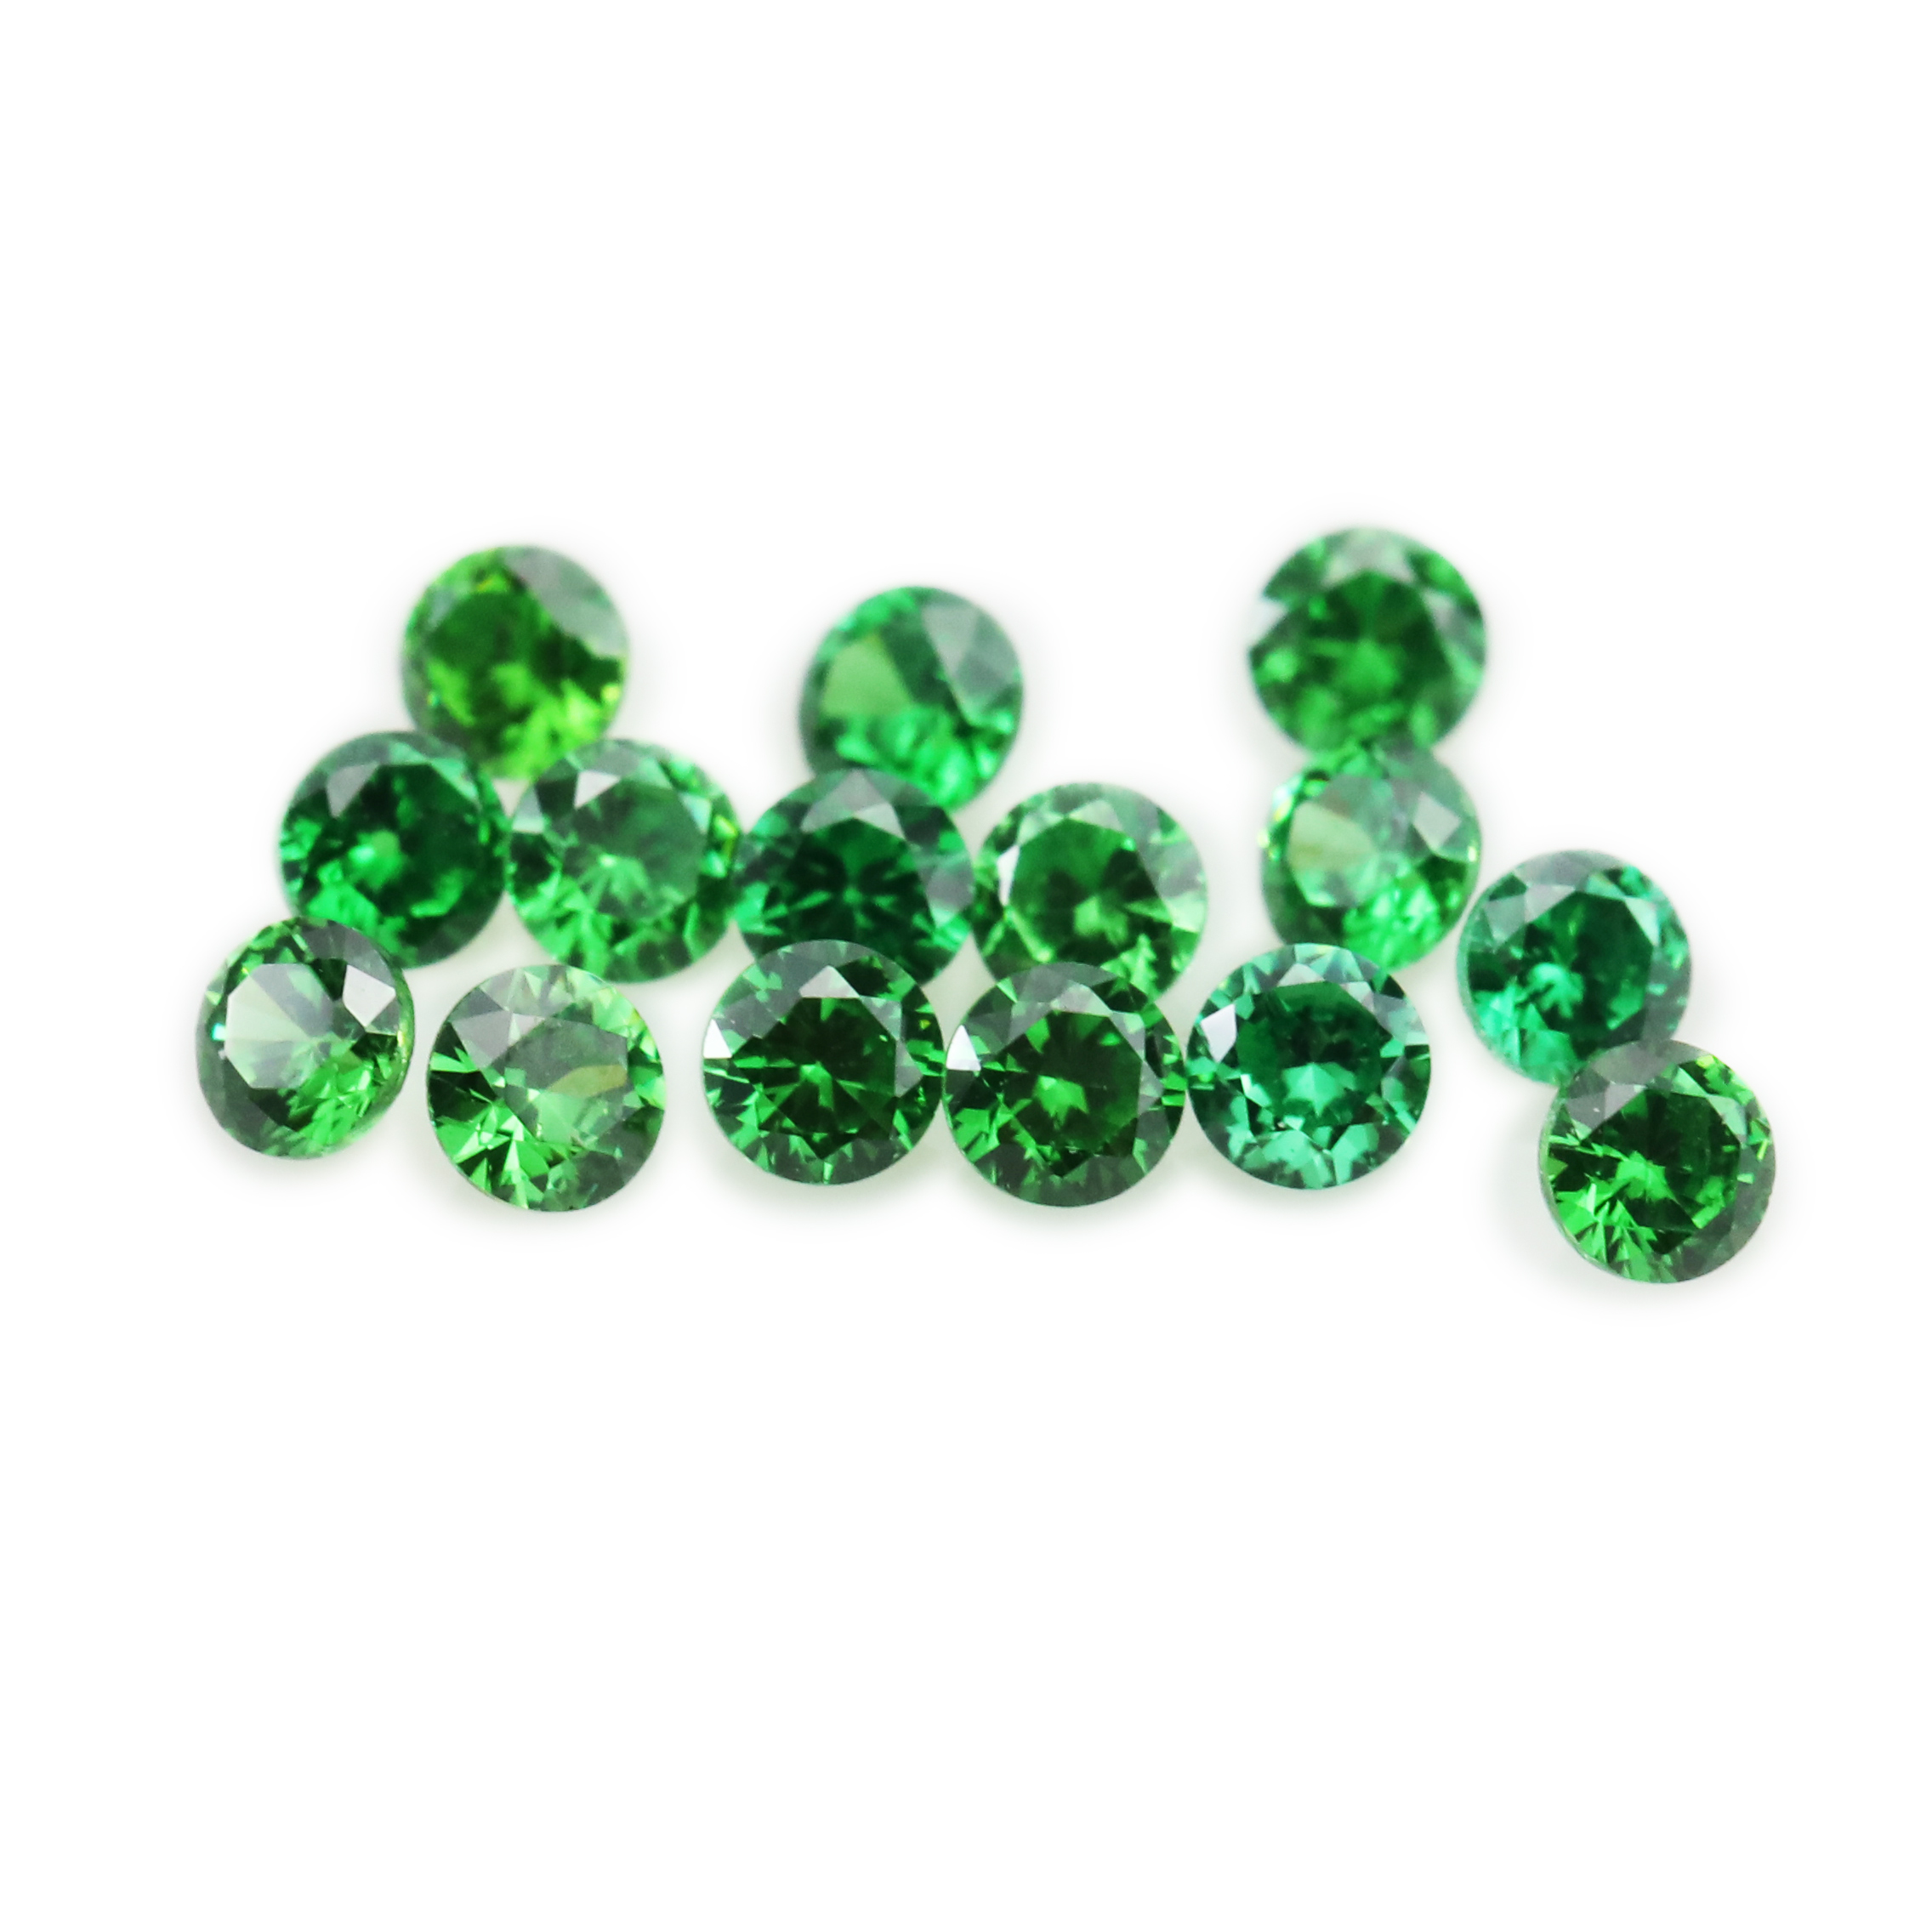 5Pcs March May December Imitation Birthstone Round Faceted Cubic Zirconia CZ Stone DIY Loose Stone Supplies 4110183-2 - Click Image to Close